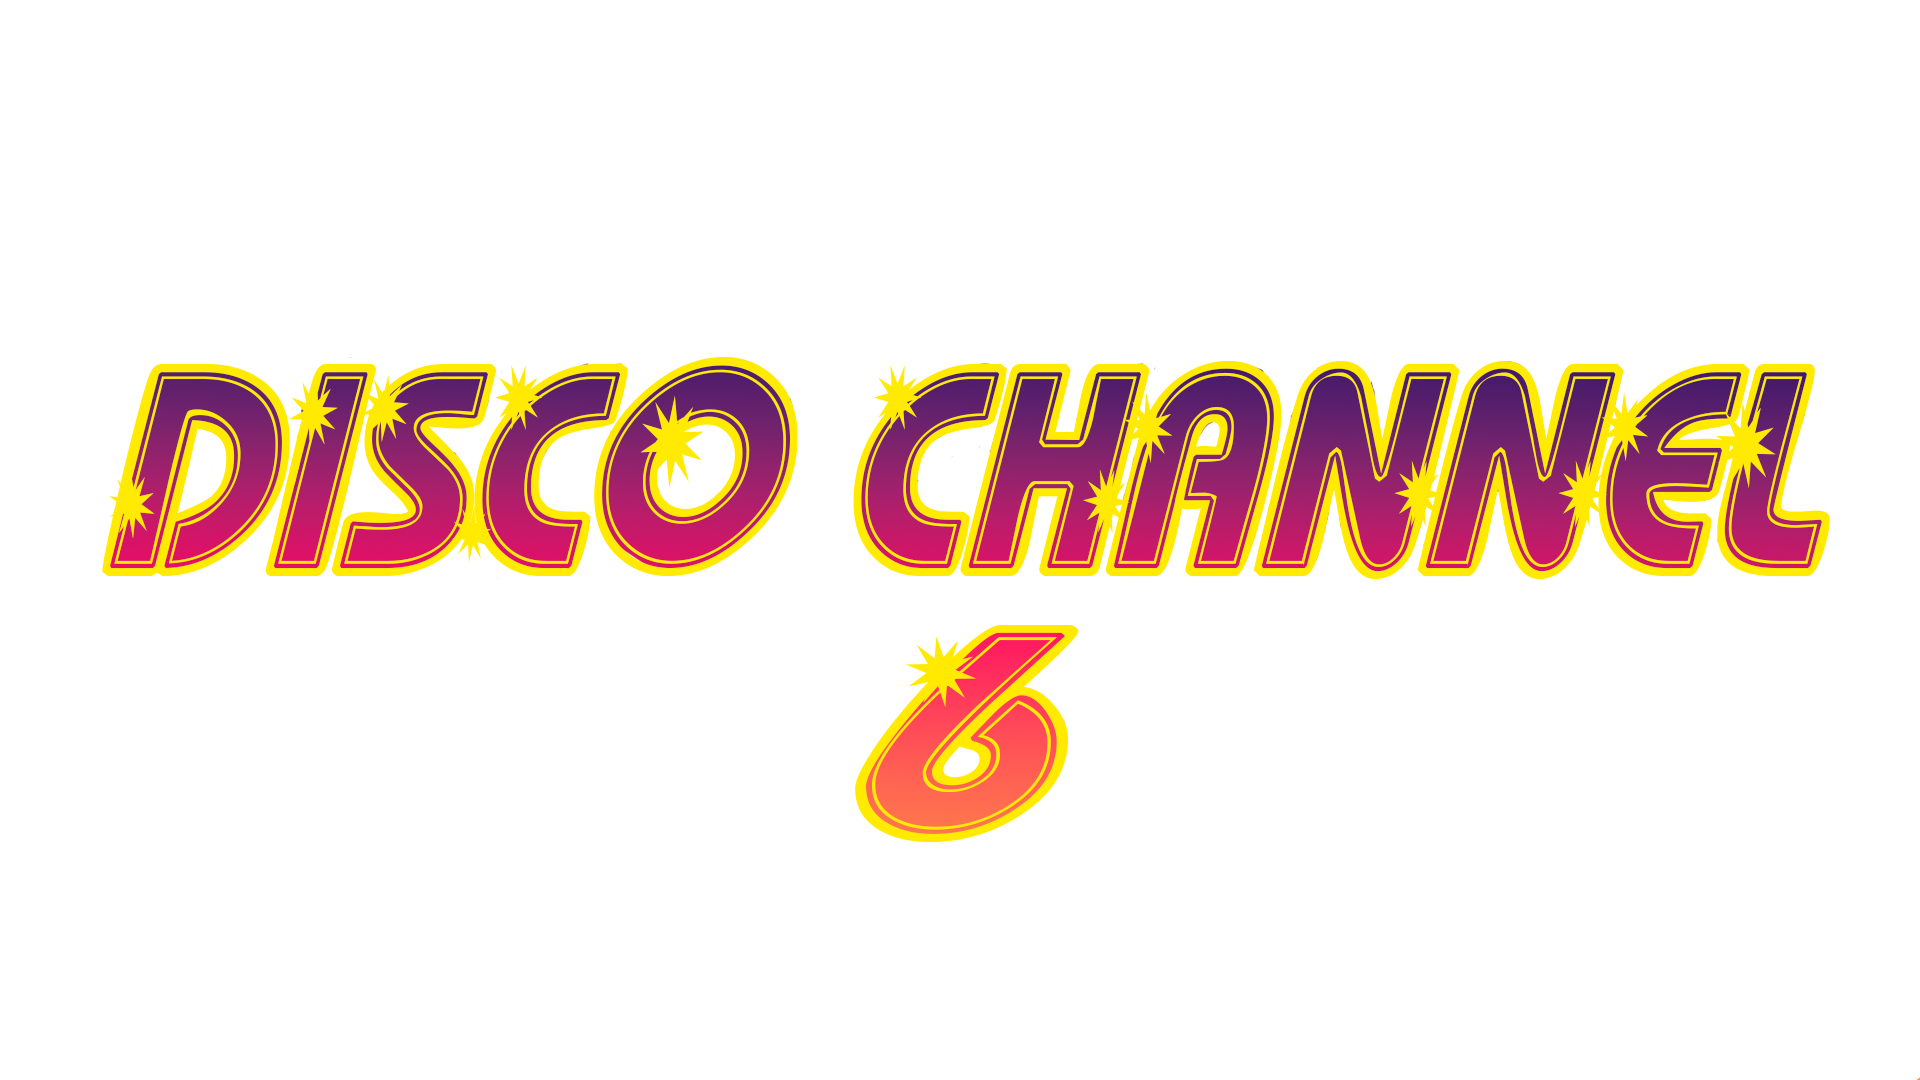 Disco Channel 6